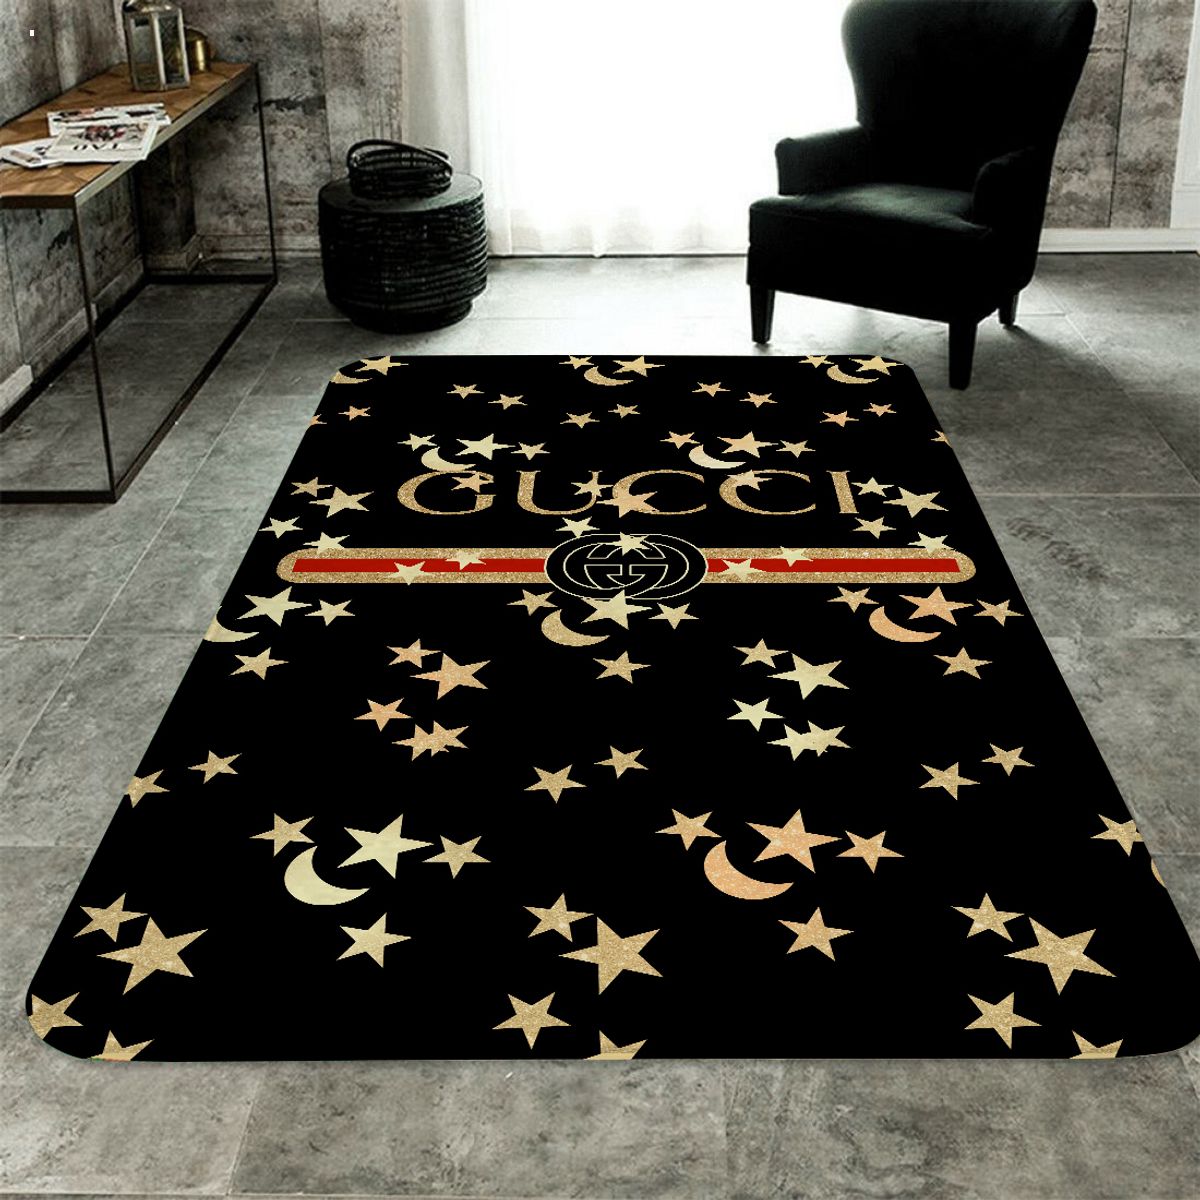 HOT Gucci Night Sky Luxury Brand Carpet Rug Limited Edition